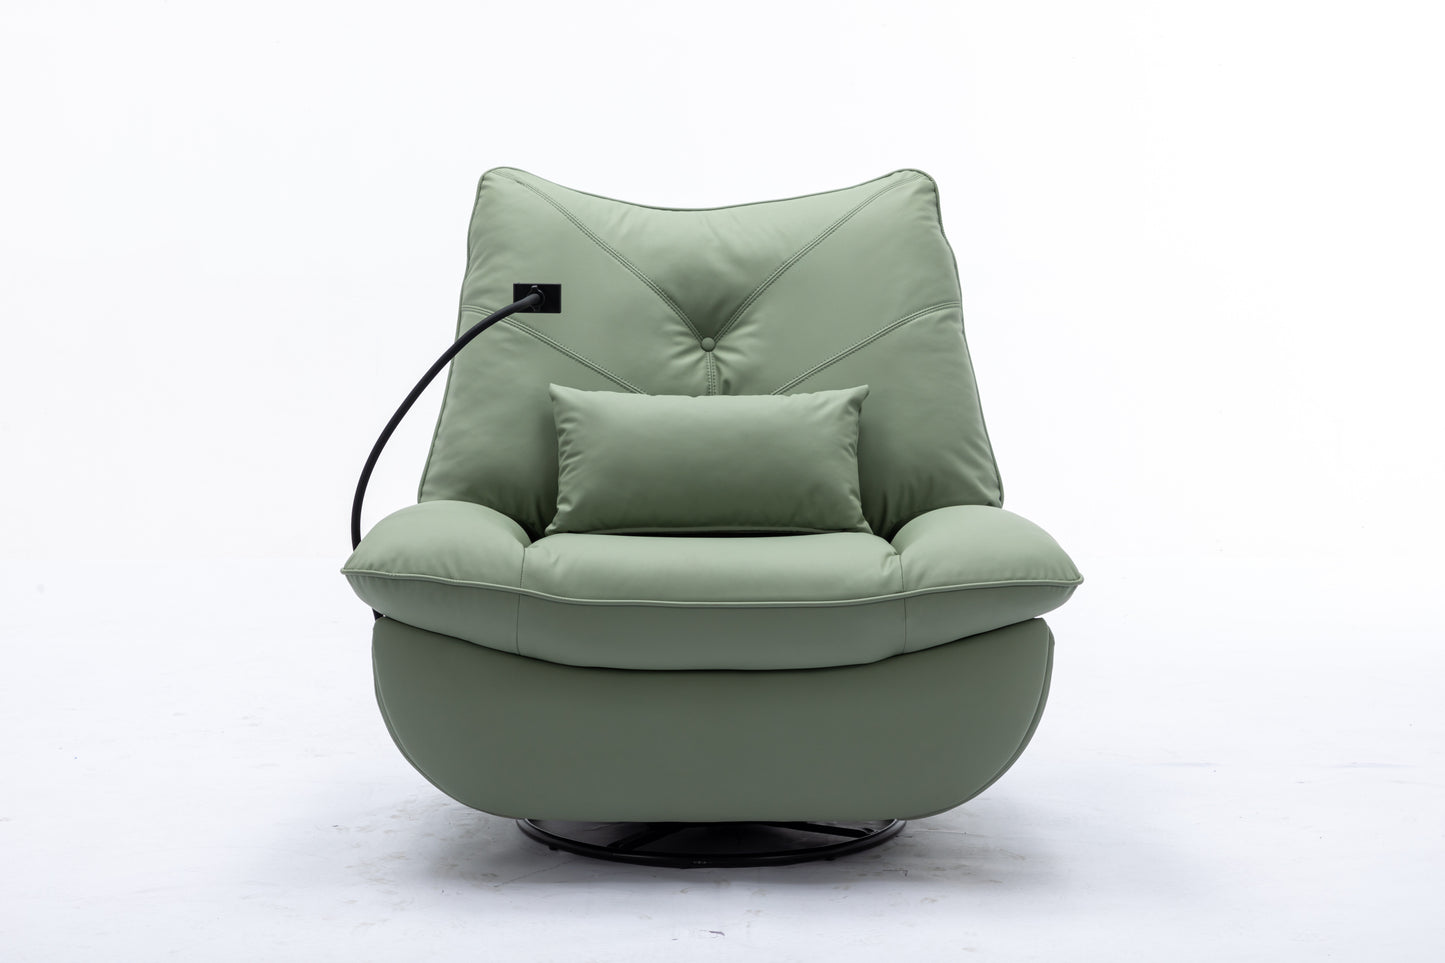 Four Modes Of  Intelligent Voice Control,Atmosphere Lamp,Bluetooth Music Player,USB Ports,Back And Forth Swing, Hidden Arm Storage and Mobile Phone Holder.270 Degree Swivel Power Recliner